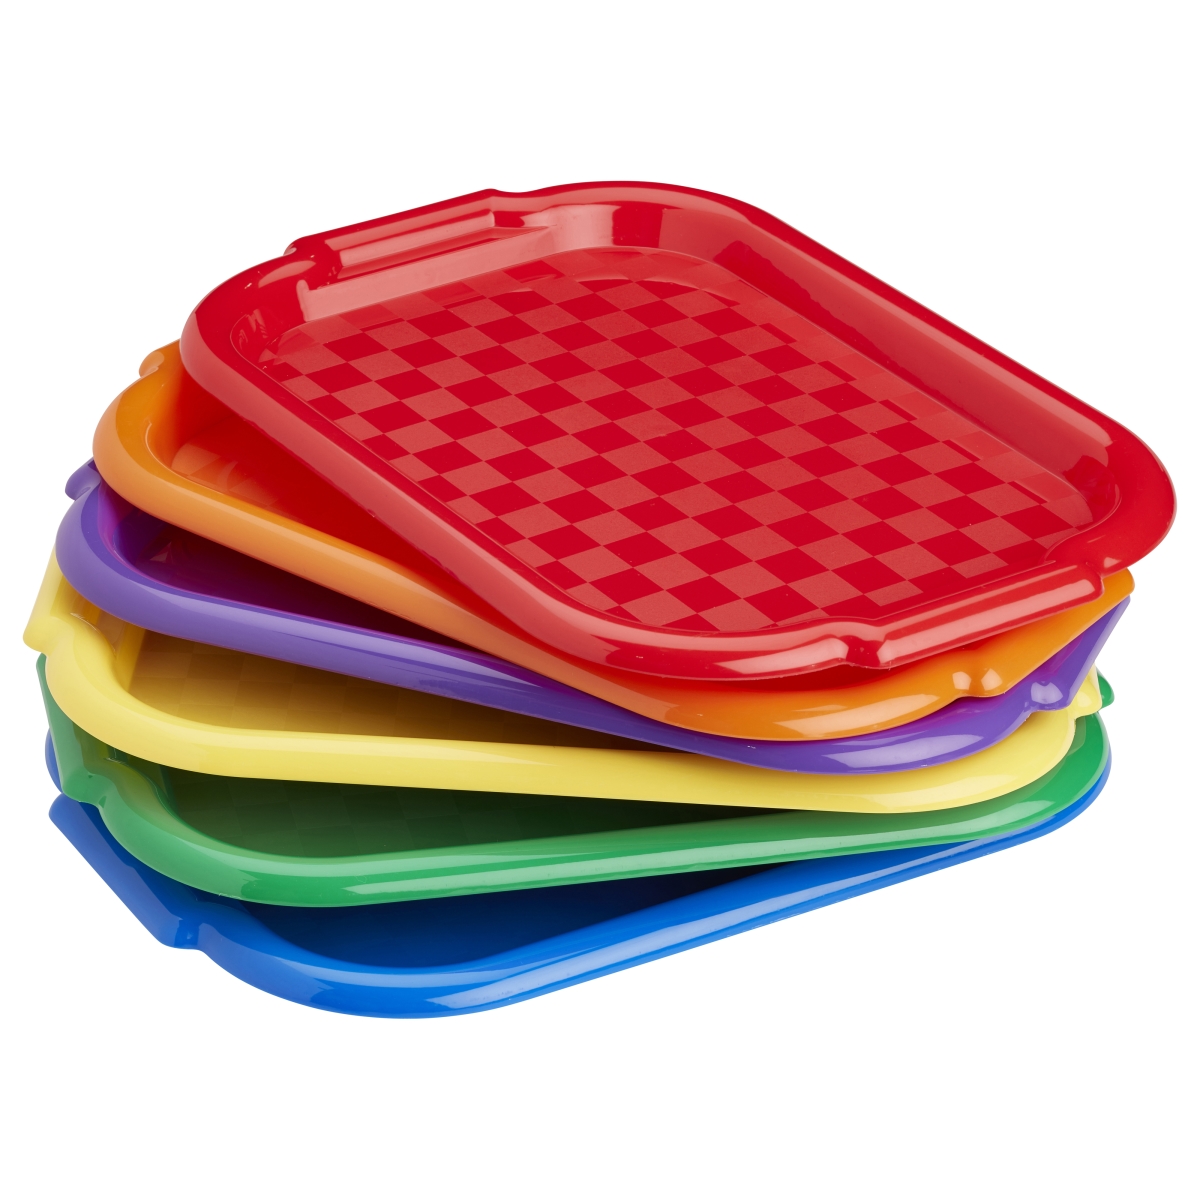 Elr-13239 14.96 X 10.43 X 0.90 In. Colorful Plastic Art Trays, 6 Piece - Pack Of 12